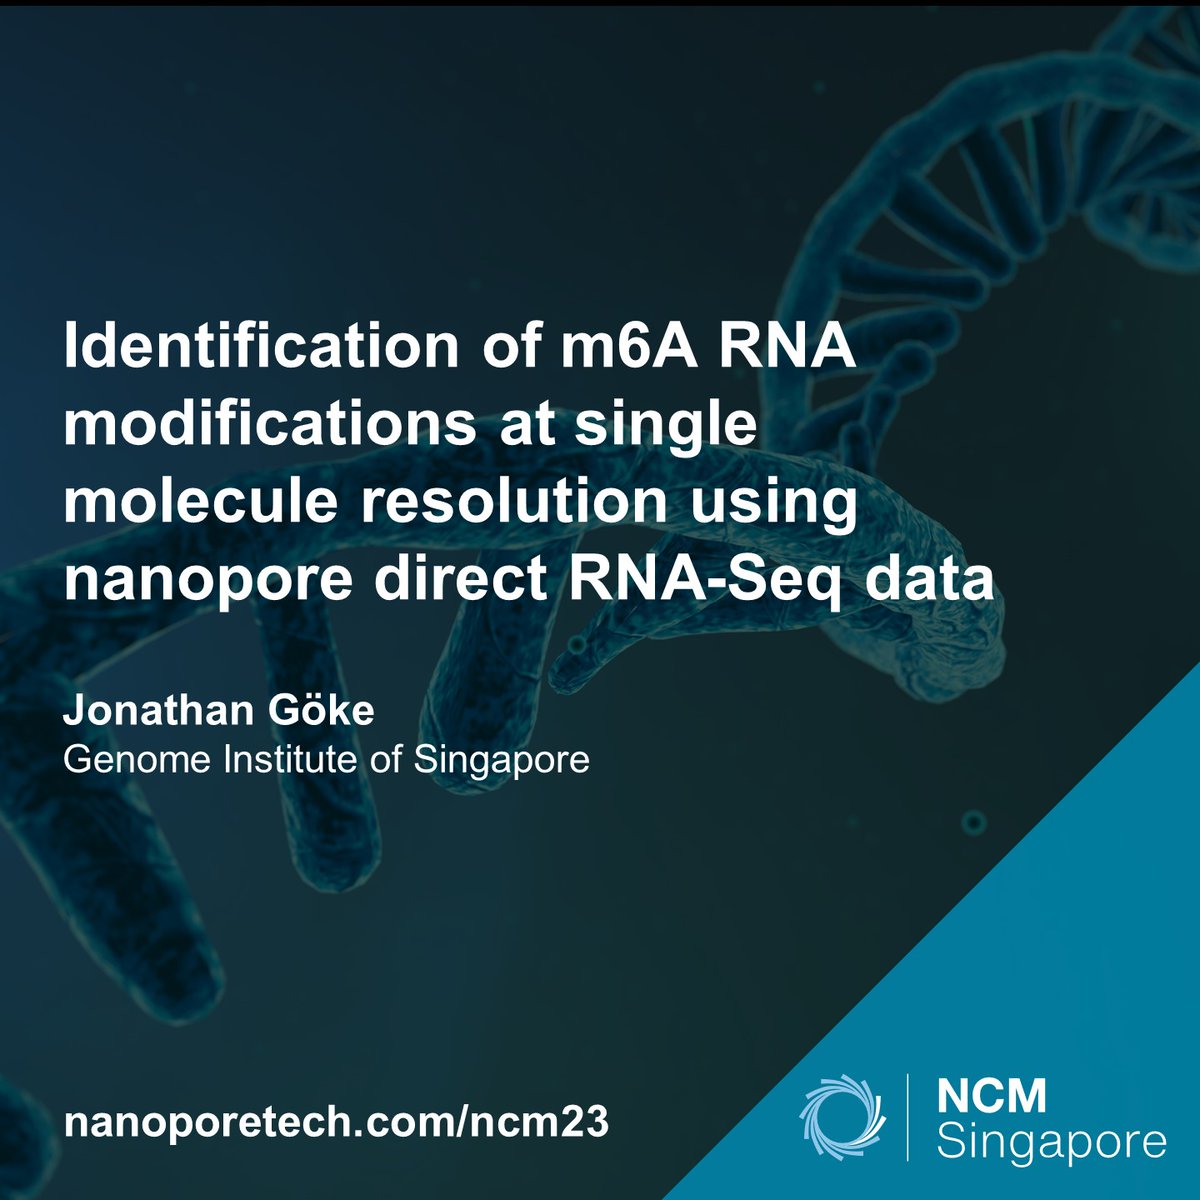 RNA modifications can form an additional layer of complexity in the transcriptome. At NCM 2023 Singapore, @JonathanGoeke will discuss direct RNA nanopore sequencing to capture, identify & quantify these RNA modifications. Find out more: bit.ly/3QyNs3x #naoporeconf